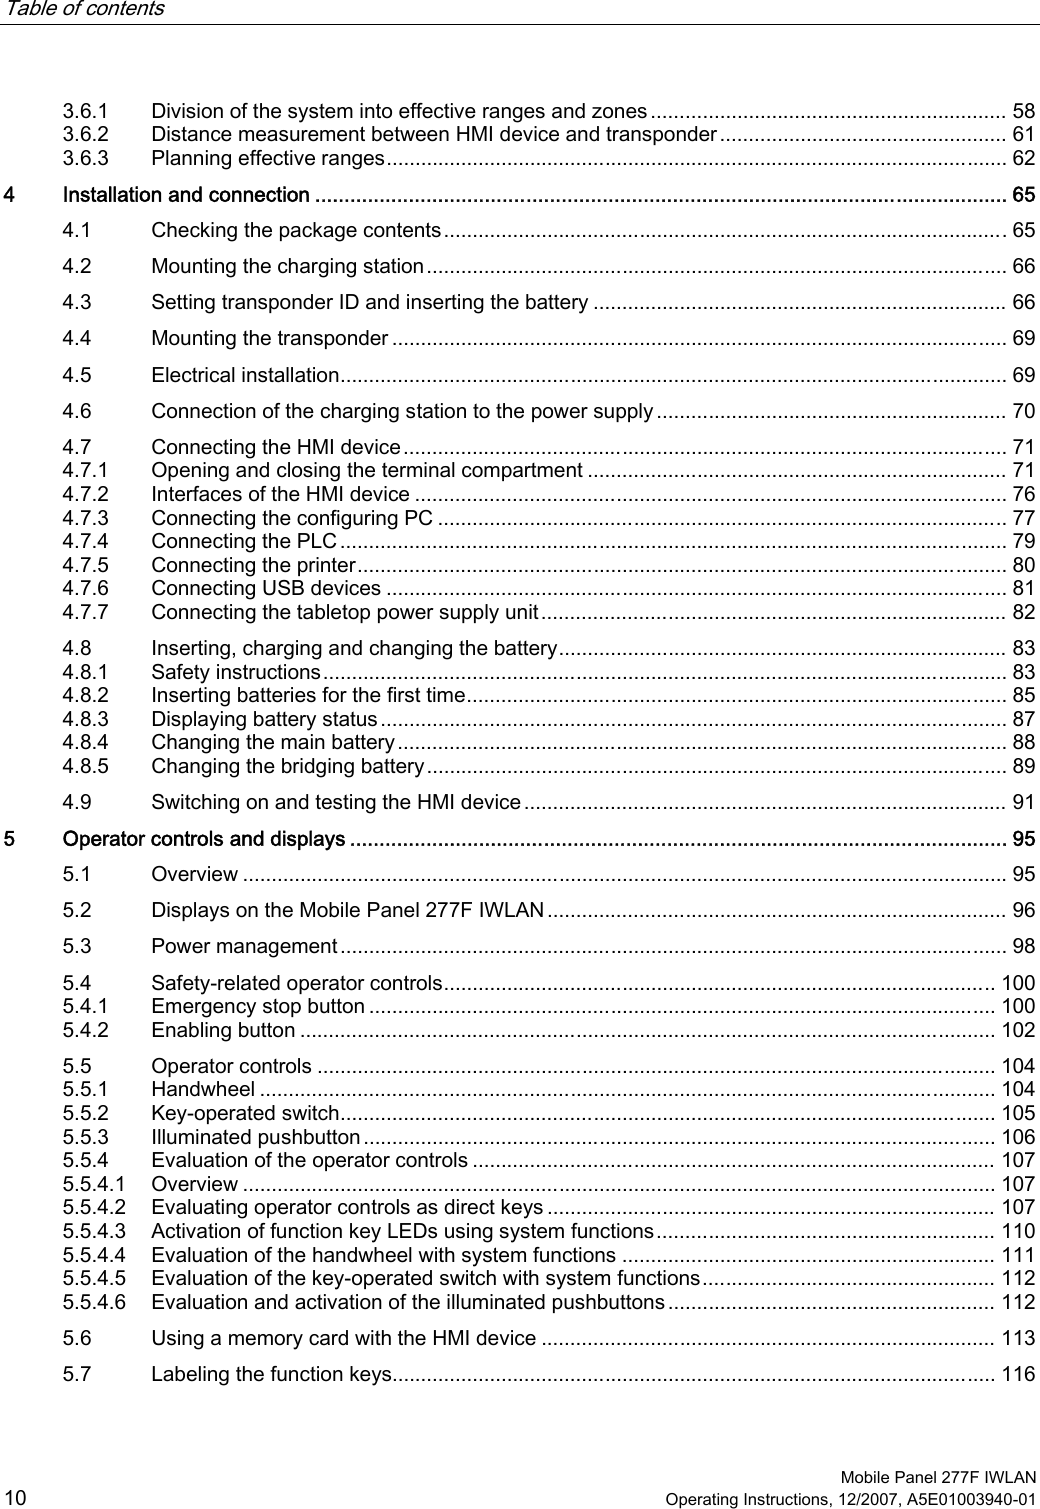 Table of contents      Mobile Panel 277F IWLAN 10 Operating Instructions, 12/2007, A5E01003940-01 3.6.1  Division of the system into effective ranges and zones .............................................................. 58 3.6.2  Distance measurement between HMI device and transponder.................................................. 61 3.6.3  Planning effective ranges............................................................................................................ 62 4  Installation and connection ...................................................................................................................... 65 4.1  Checking the package contents..................................................................................................65 4.2  Mounting the charging station..................................................................................................... 66 4.3  Setting transponder ID and inserting the battery ........................................................................ 66 4.4  Mounting the transponder ........................................................................................................... 69 4.5  Electrical installation.................................................................................................................... 69 4.6  Connection of the charging station to the power supply ............................................................. 70 4.7  Connecting the HMI device......................................................................................................... 71 4.7.1  Opening and closing the terminal compartment ......................................................................... 71 4.7.2  Interfaces of the HMI device ....................................................................................................... 76 4.7.3  Connecting the configuring PC ................................................................................................... 77 4.7.4  Connecting the PLC.................................................................................................................... 79 4.7.5  Connecting the printer................................................................................................................. 80 4.7.6  Connecting USB devices ............................................................................................................ 81 4.7.7  Connecting the tabletop power supply unit................................................................................. 82 4.8  Inserting, charging and changing the battery.............................................................................. 83 4.8.1  Safety instructions....................................................................................................................... 83 4.8.2  Inserting batteries for the first time.............................................................................................. 85 4.8.3  Displaying battery status............................................................................................................. 87 4.8.4  Changing the main battery.......................................................................................................... 88 4.8.5  Changing the bridging battery..................................................................................................... 89 4.9  Switching on and testing the HMI device.................................................................................... 91 5  Operator controls and displays ................................................................................................................ 95 5.1  Overview ..................................................................................................................................... 95 5.2  Displays on the Mobile Panel 277F IWLAN................................................................................ 96 5.3  Power management.................................................................................................................... 98 5.4  Safety-related operator controls................................................................................................ 100 5.4.1  Emergency stop button ............................................................................................................. 100 5.4.2  Enabling button ......................................................................................................................... 102 5.5  Operator controls ...................................................................................................................... 104 5.5.1  Handwheel ................................................................................................................................ 104 5.5.2  Key-operated switch.................................................................................................................. 105 5.5.3  Illuminated pushbutton.............................................................................................................. 106 5.5.4  Evaluation of the operator controls ........................................................................................... 107 5.5.4.1  Overview ................................................................................................................................... 107 5.5.4.2  Evaluating operator controls as direct keys .............................................................................. 107 5.5.4.3  Activation of function key LEDs using system functions........................................................... 110 5.5.4.4  Evaluation of the handwheel with system functions ................................................................. 111 5.5.4.5  Evaluation of the key-operated switch with system functions................................................... 112 5.5.4.6  Evaluation and activation of the illuminated pushbuttons ......................................................... 112 5.6  Using a memory card with the HMI device ............................................................................... 113 5.7  Labeling the function keys......................................................................................................... 116 